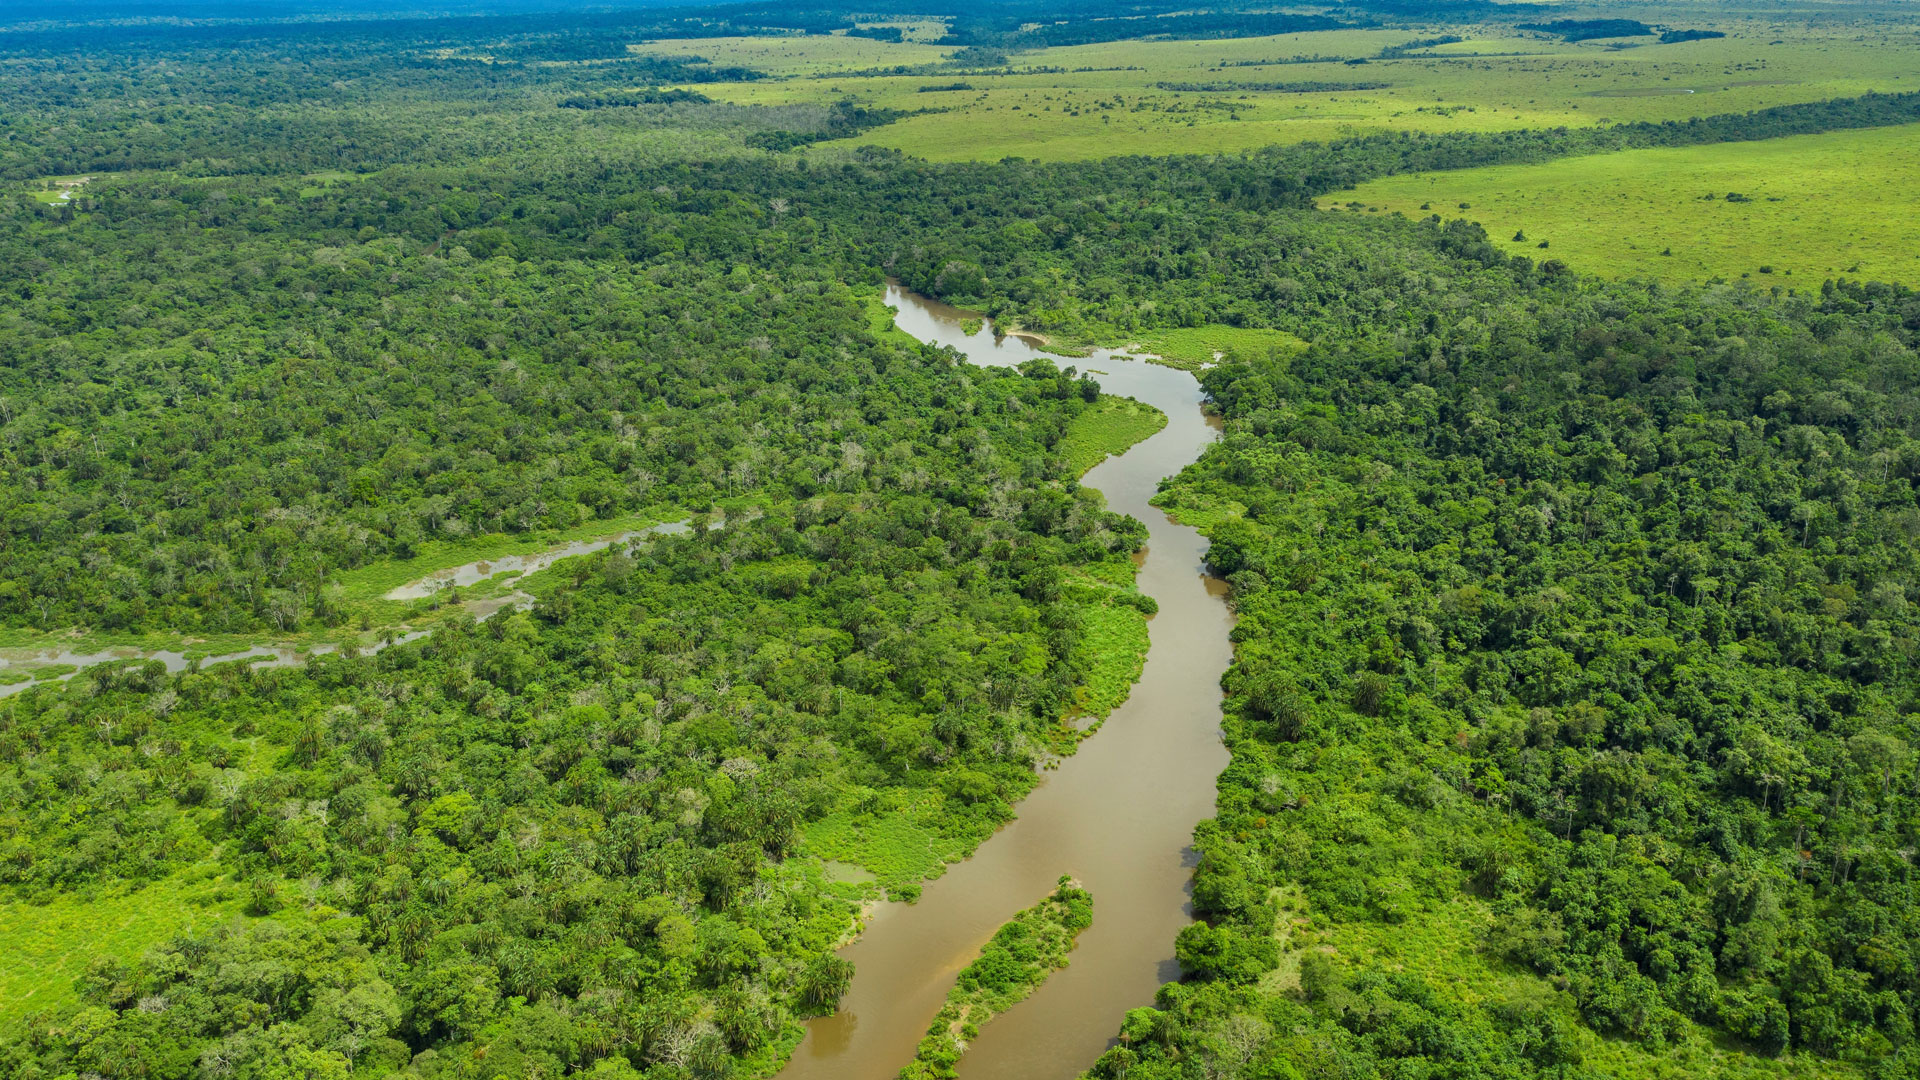 Aerial view of a meandering jungle river in the rainforest of the Congo Basin. Odzala National Park, Republic of Congo